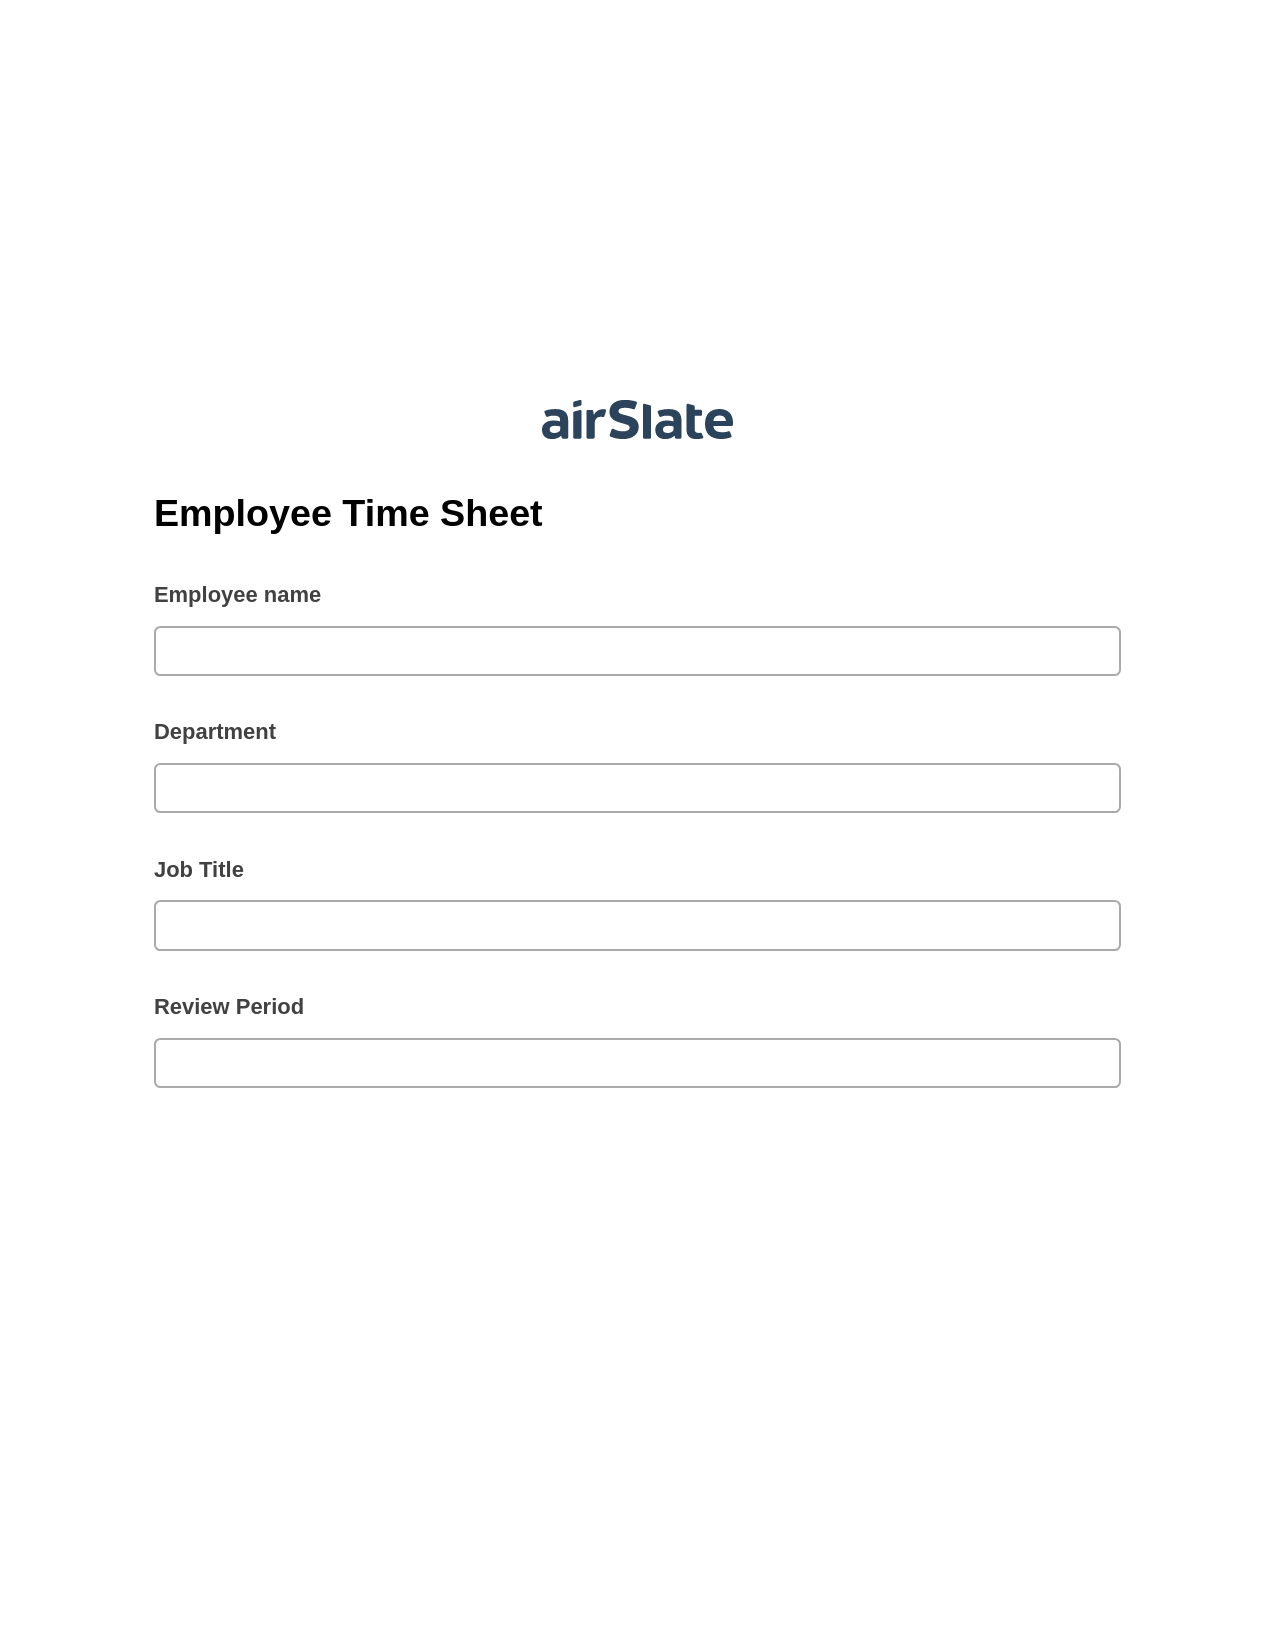 Employee Time Sheet Pre-fill Dropdowns from MySQL Bot, Update Audit Trail Bot, Archive to Dropbox Bot